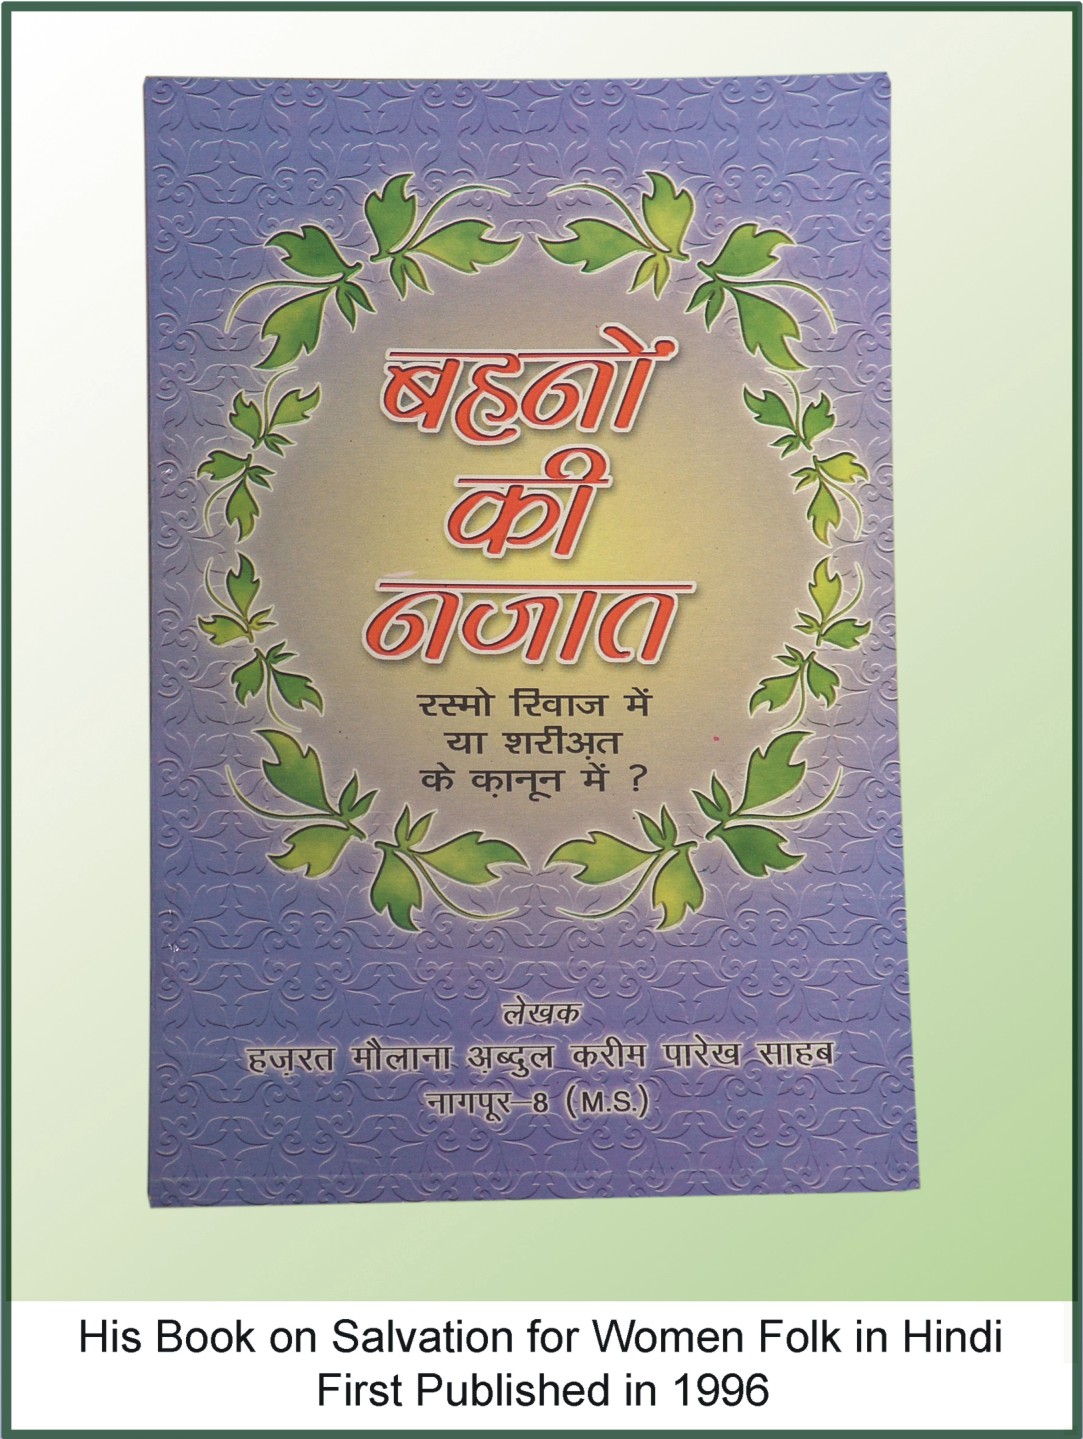 Salvation for Women Folk (Hindi) First Published in 1996